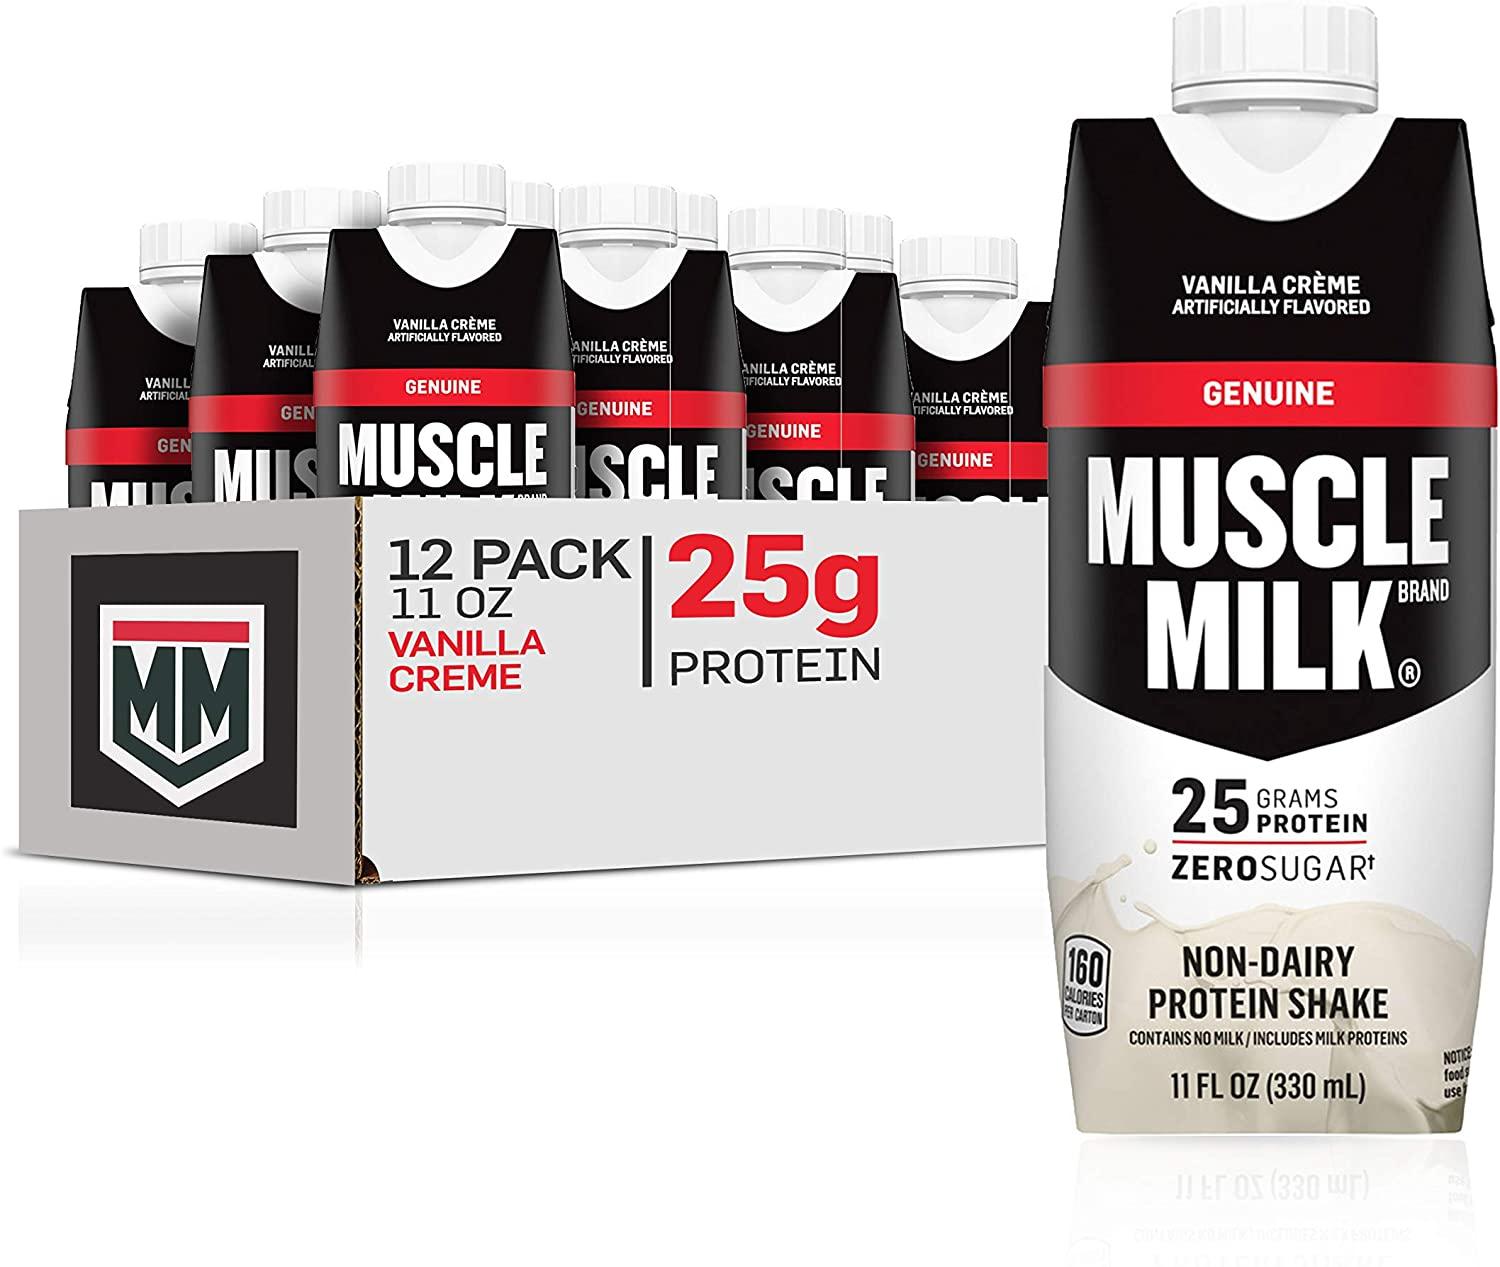 12 Muscle Milk Protein Shake for $10.48 Shipped